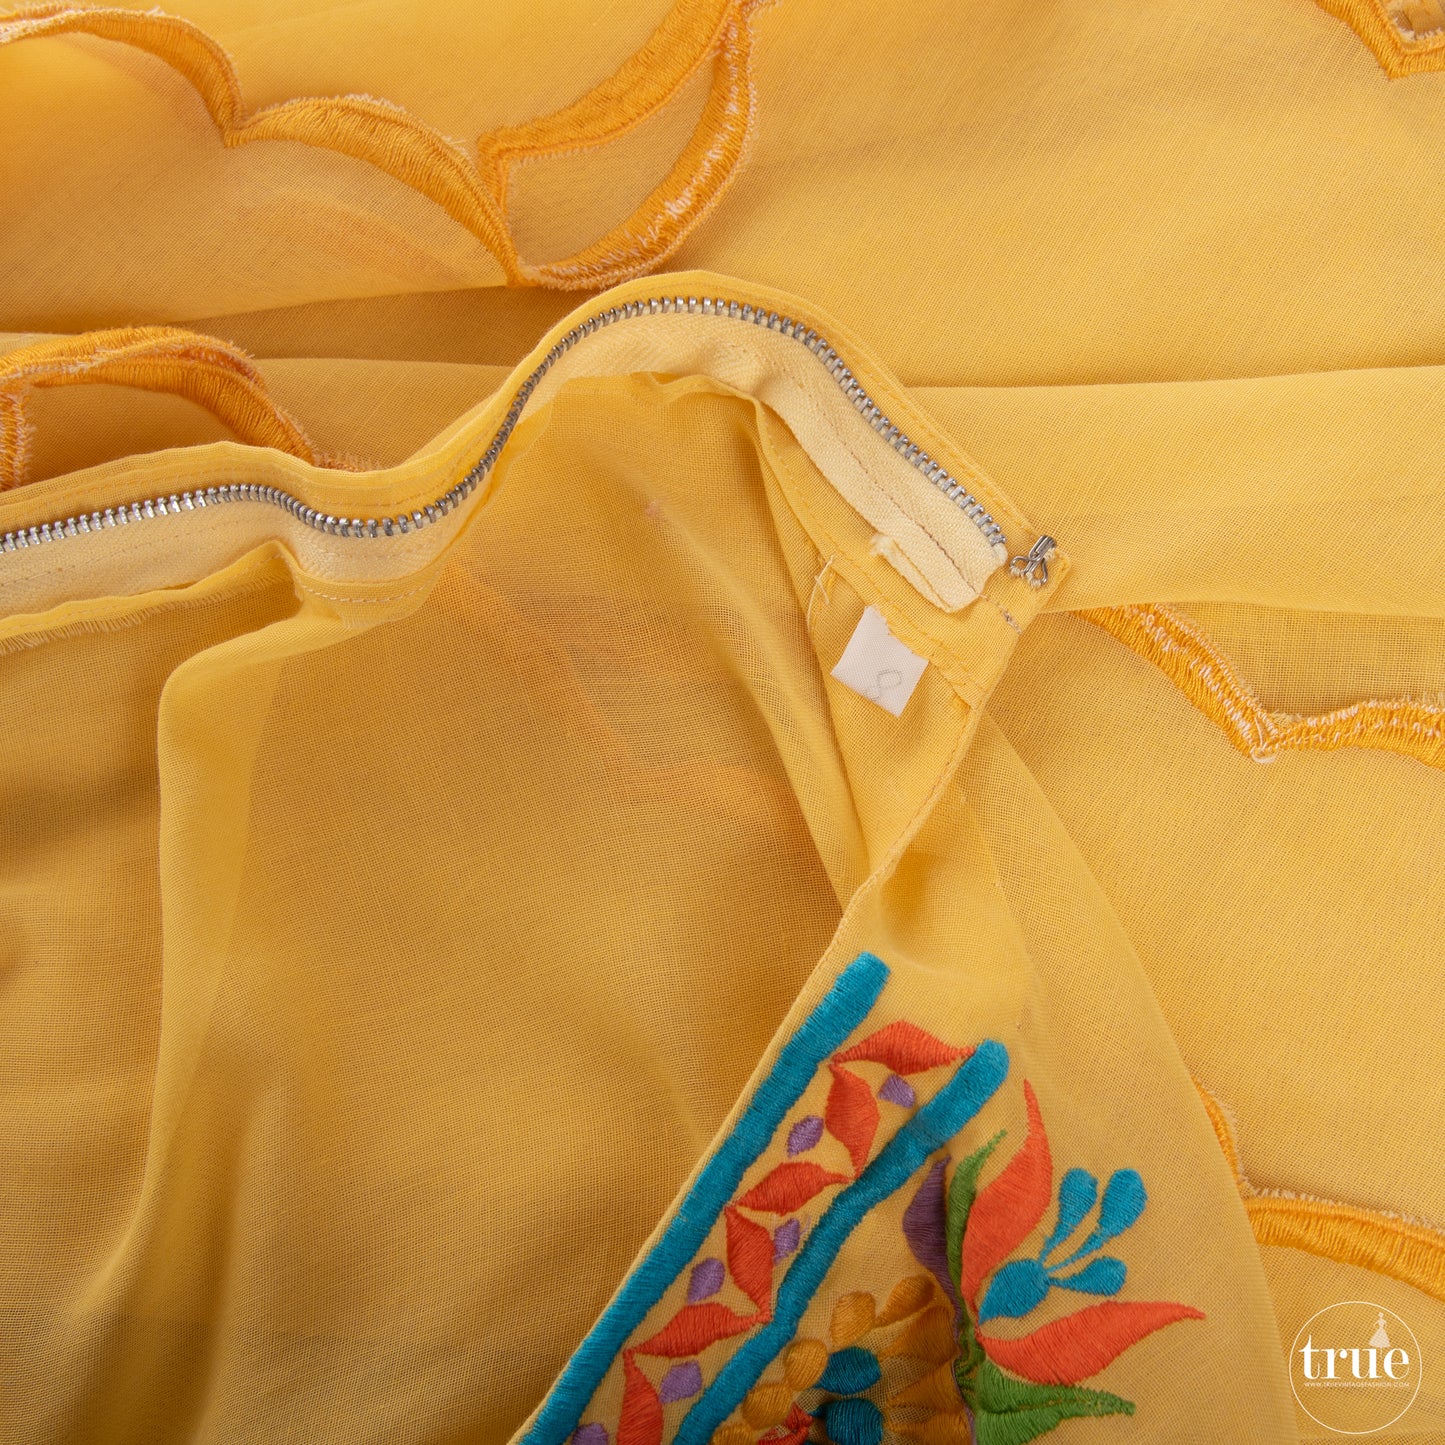 1970's embroidered yellow gauze festival caftan dress